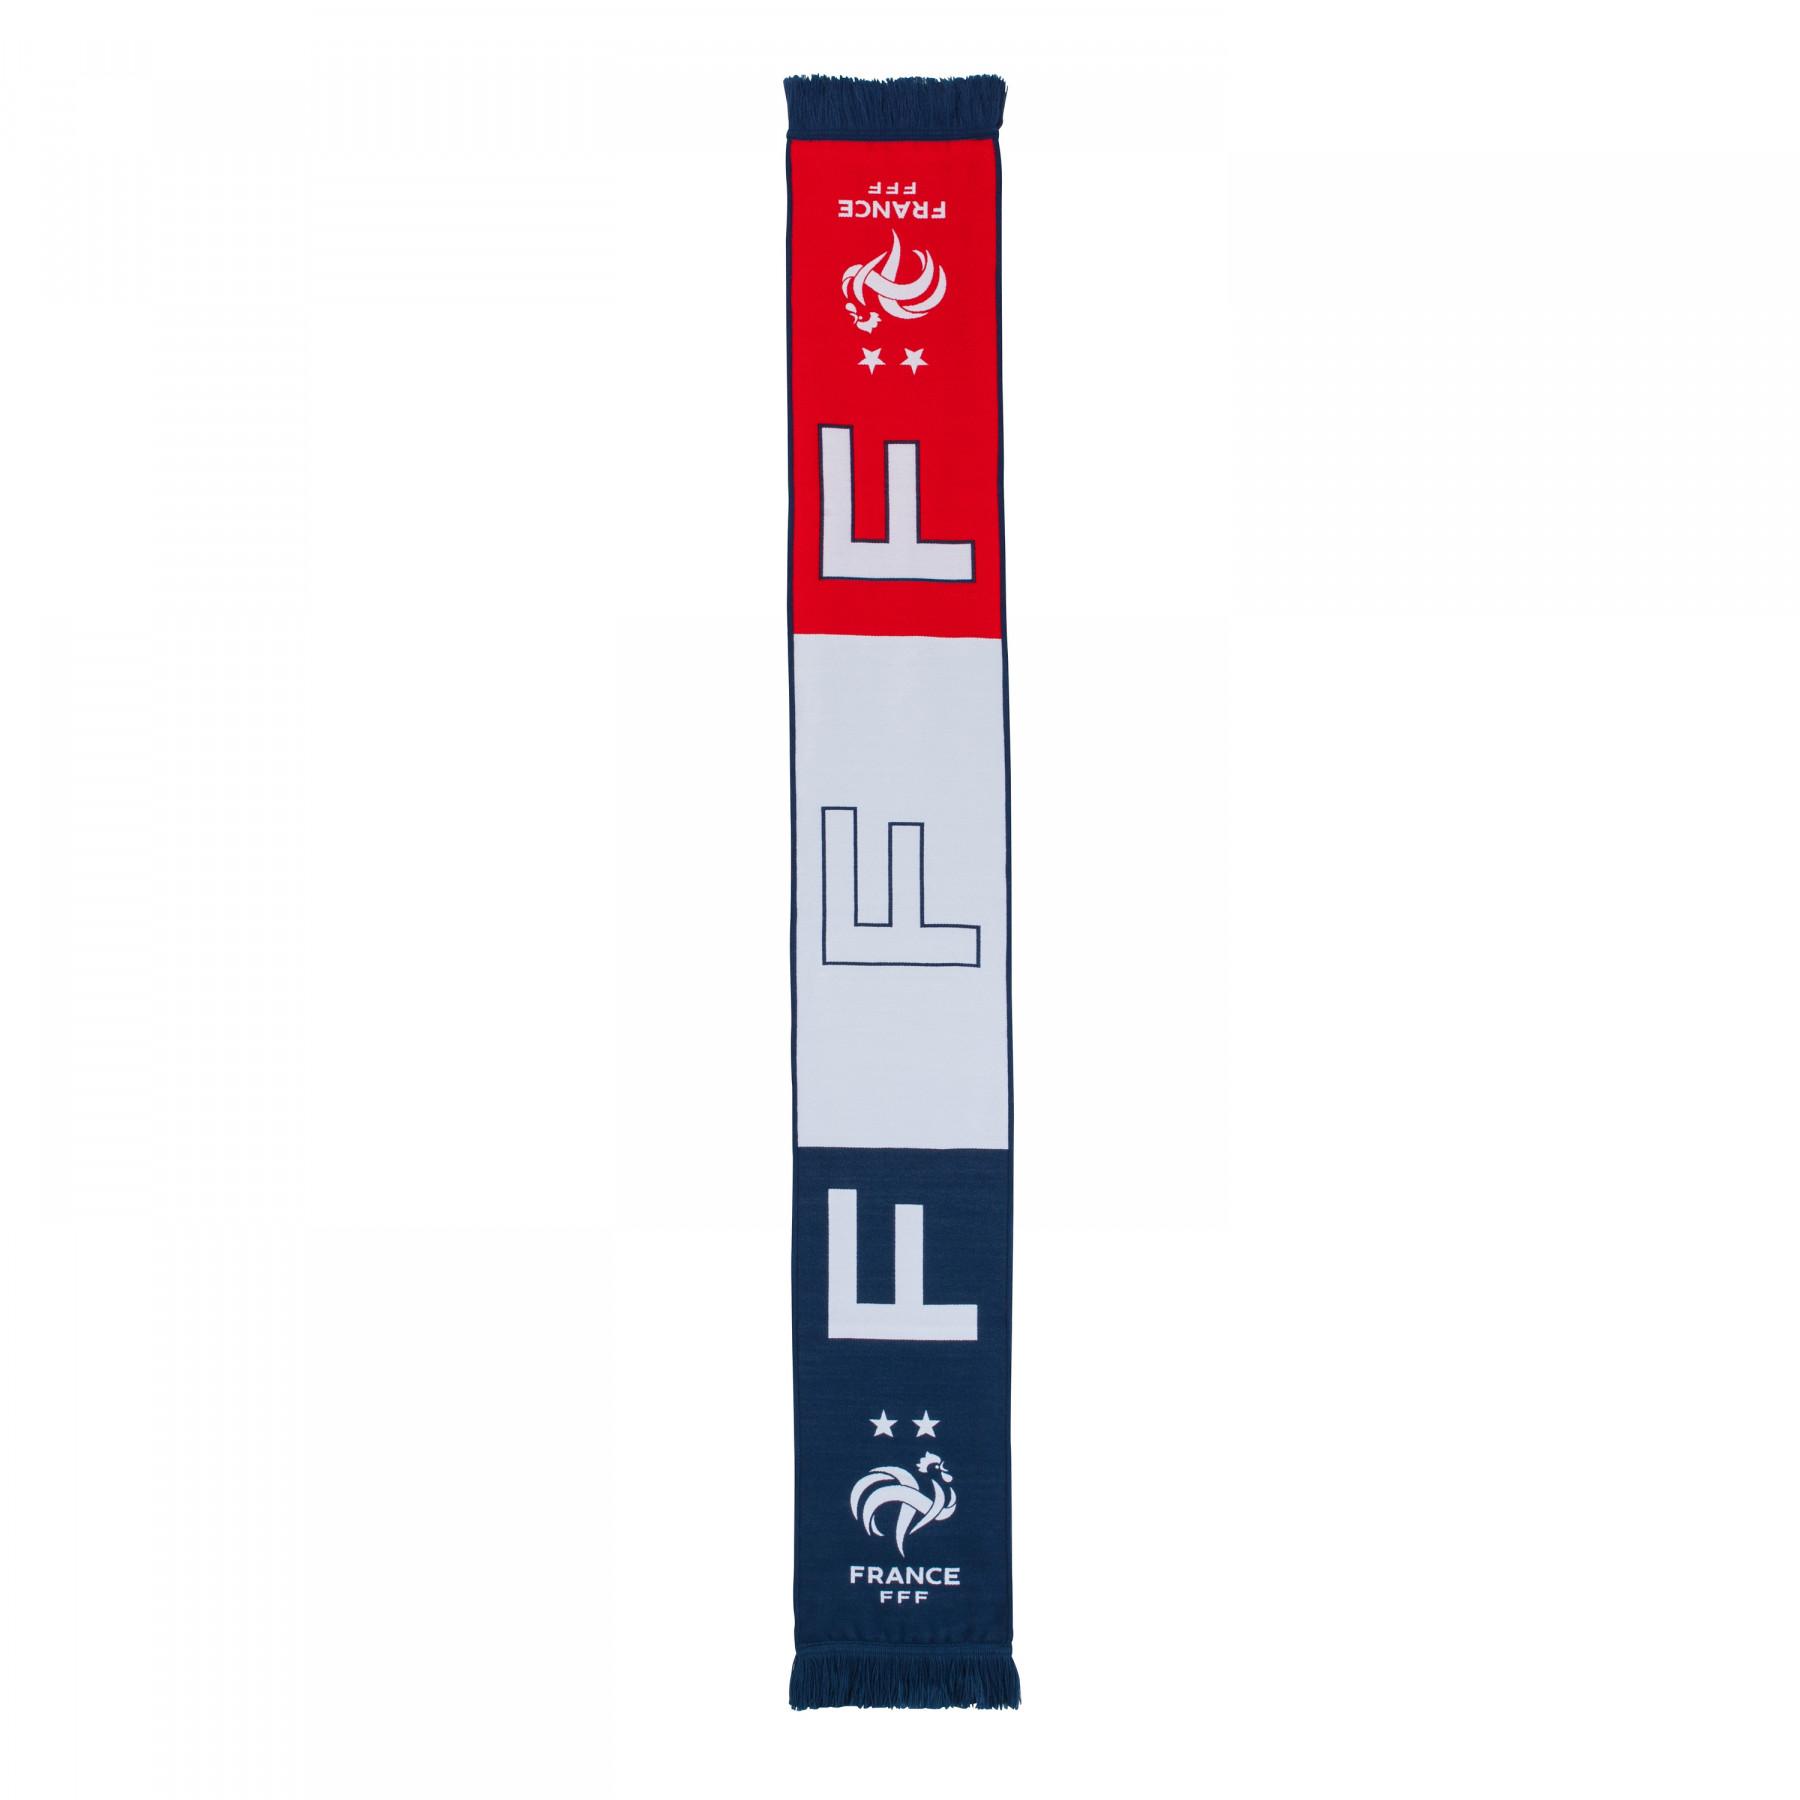 Team scarf from France tricolore